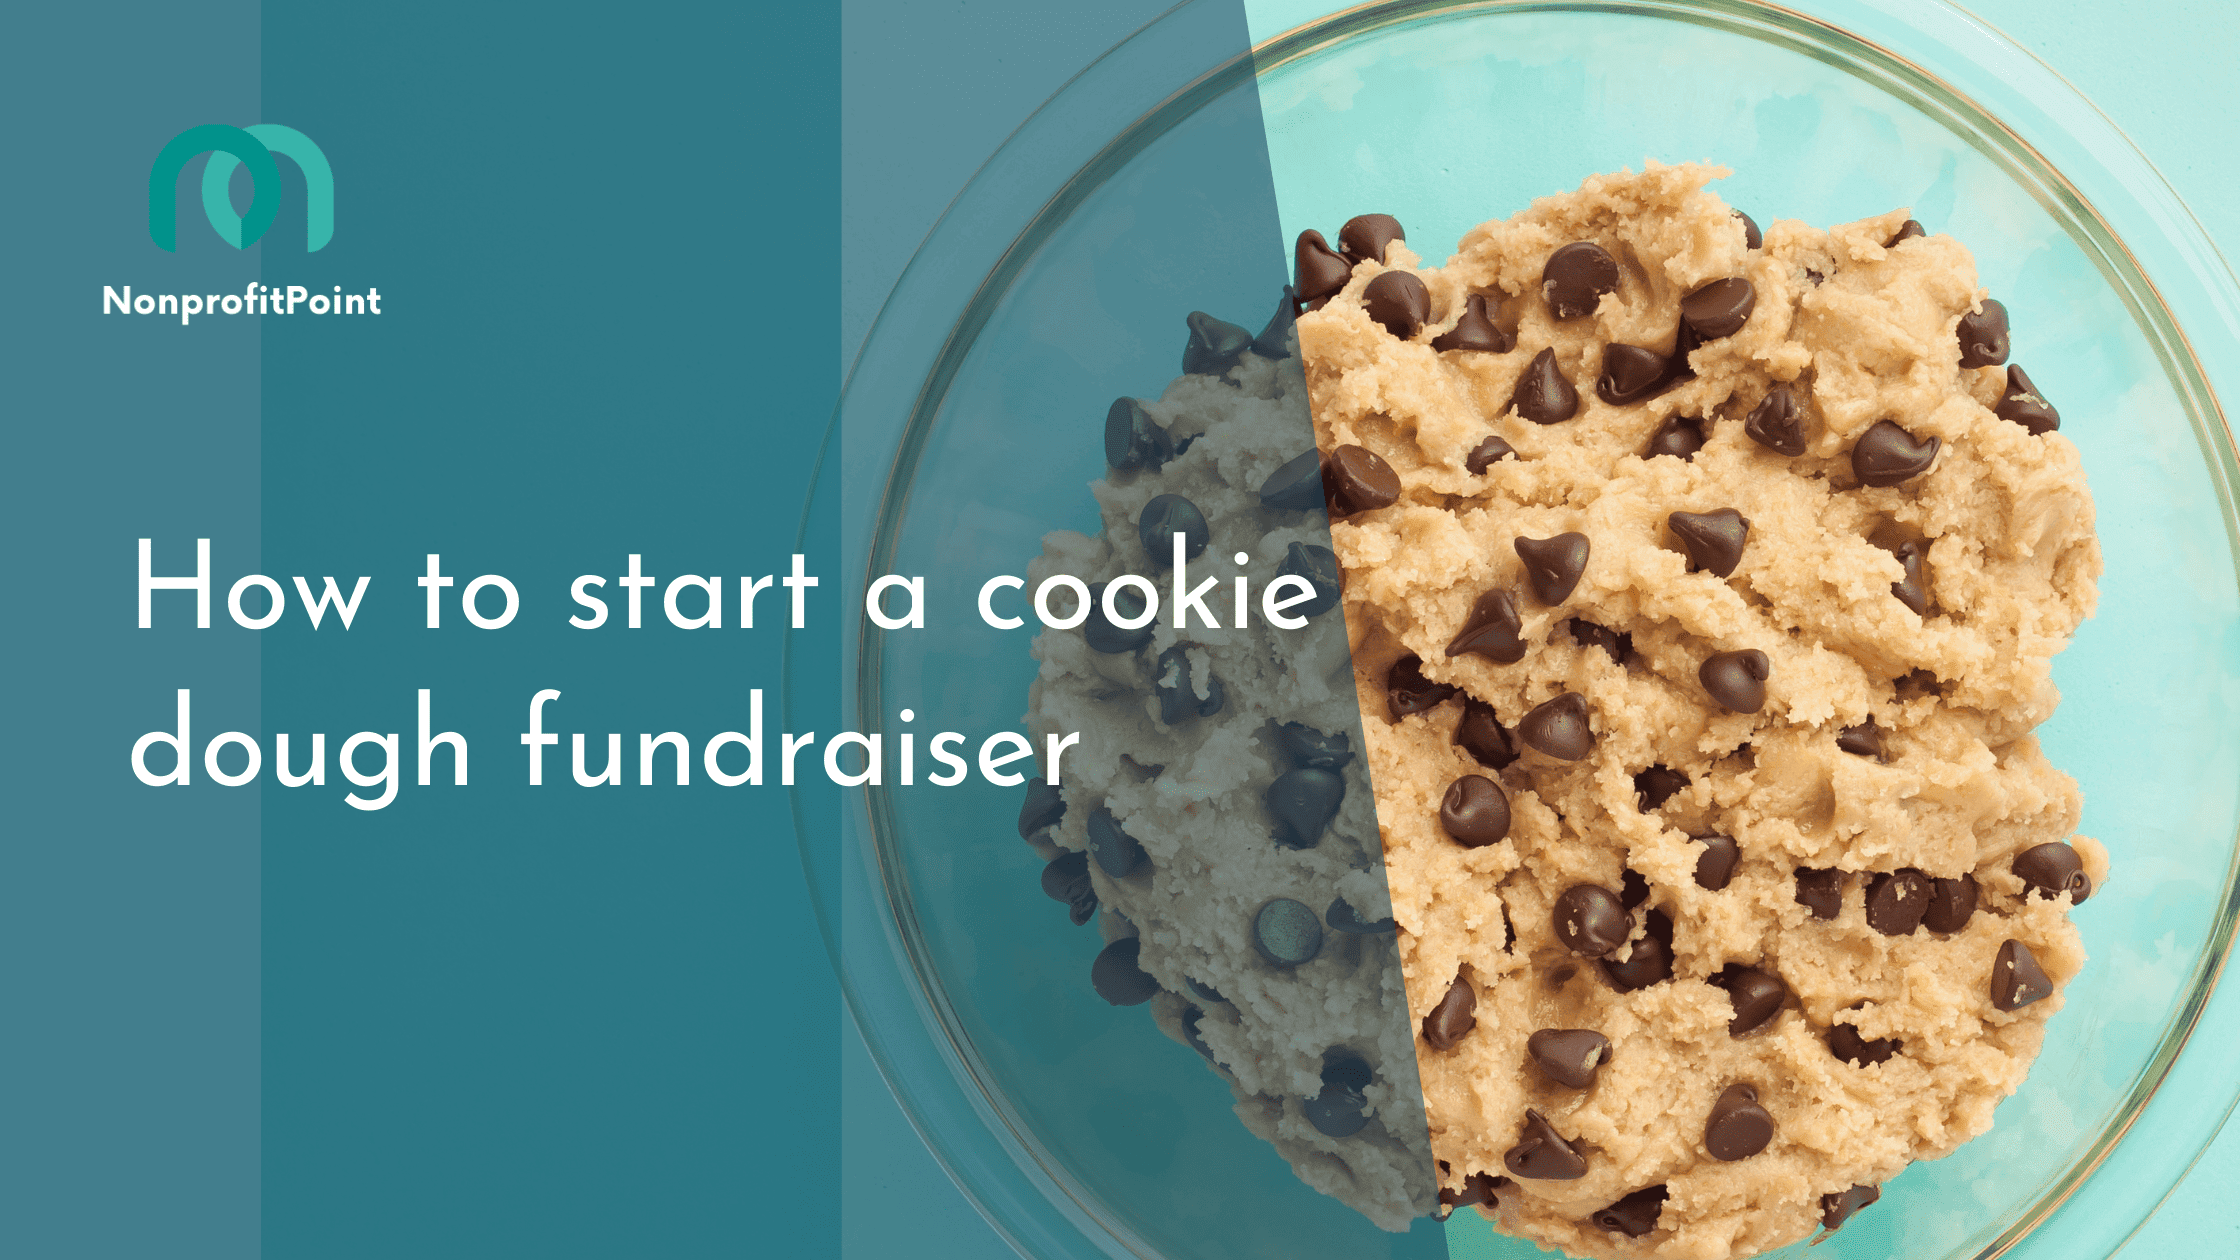 How to start a cookie dough fundraiser